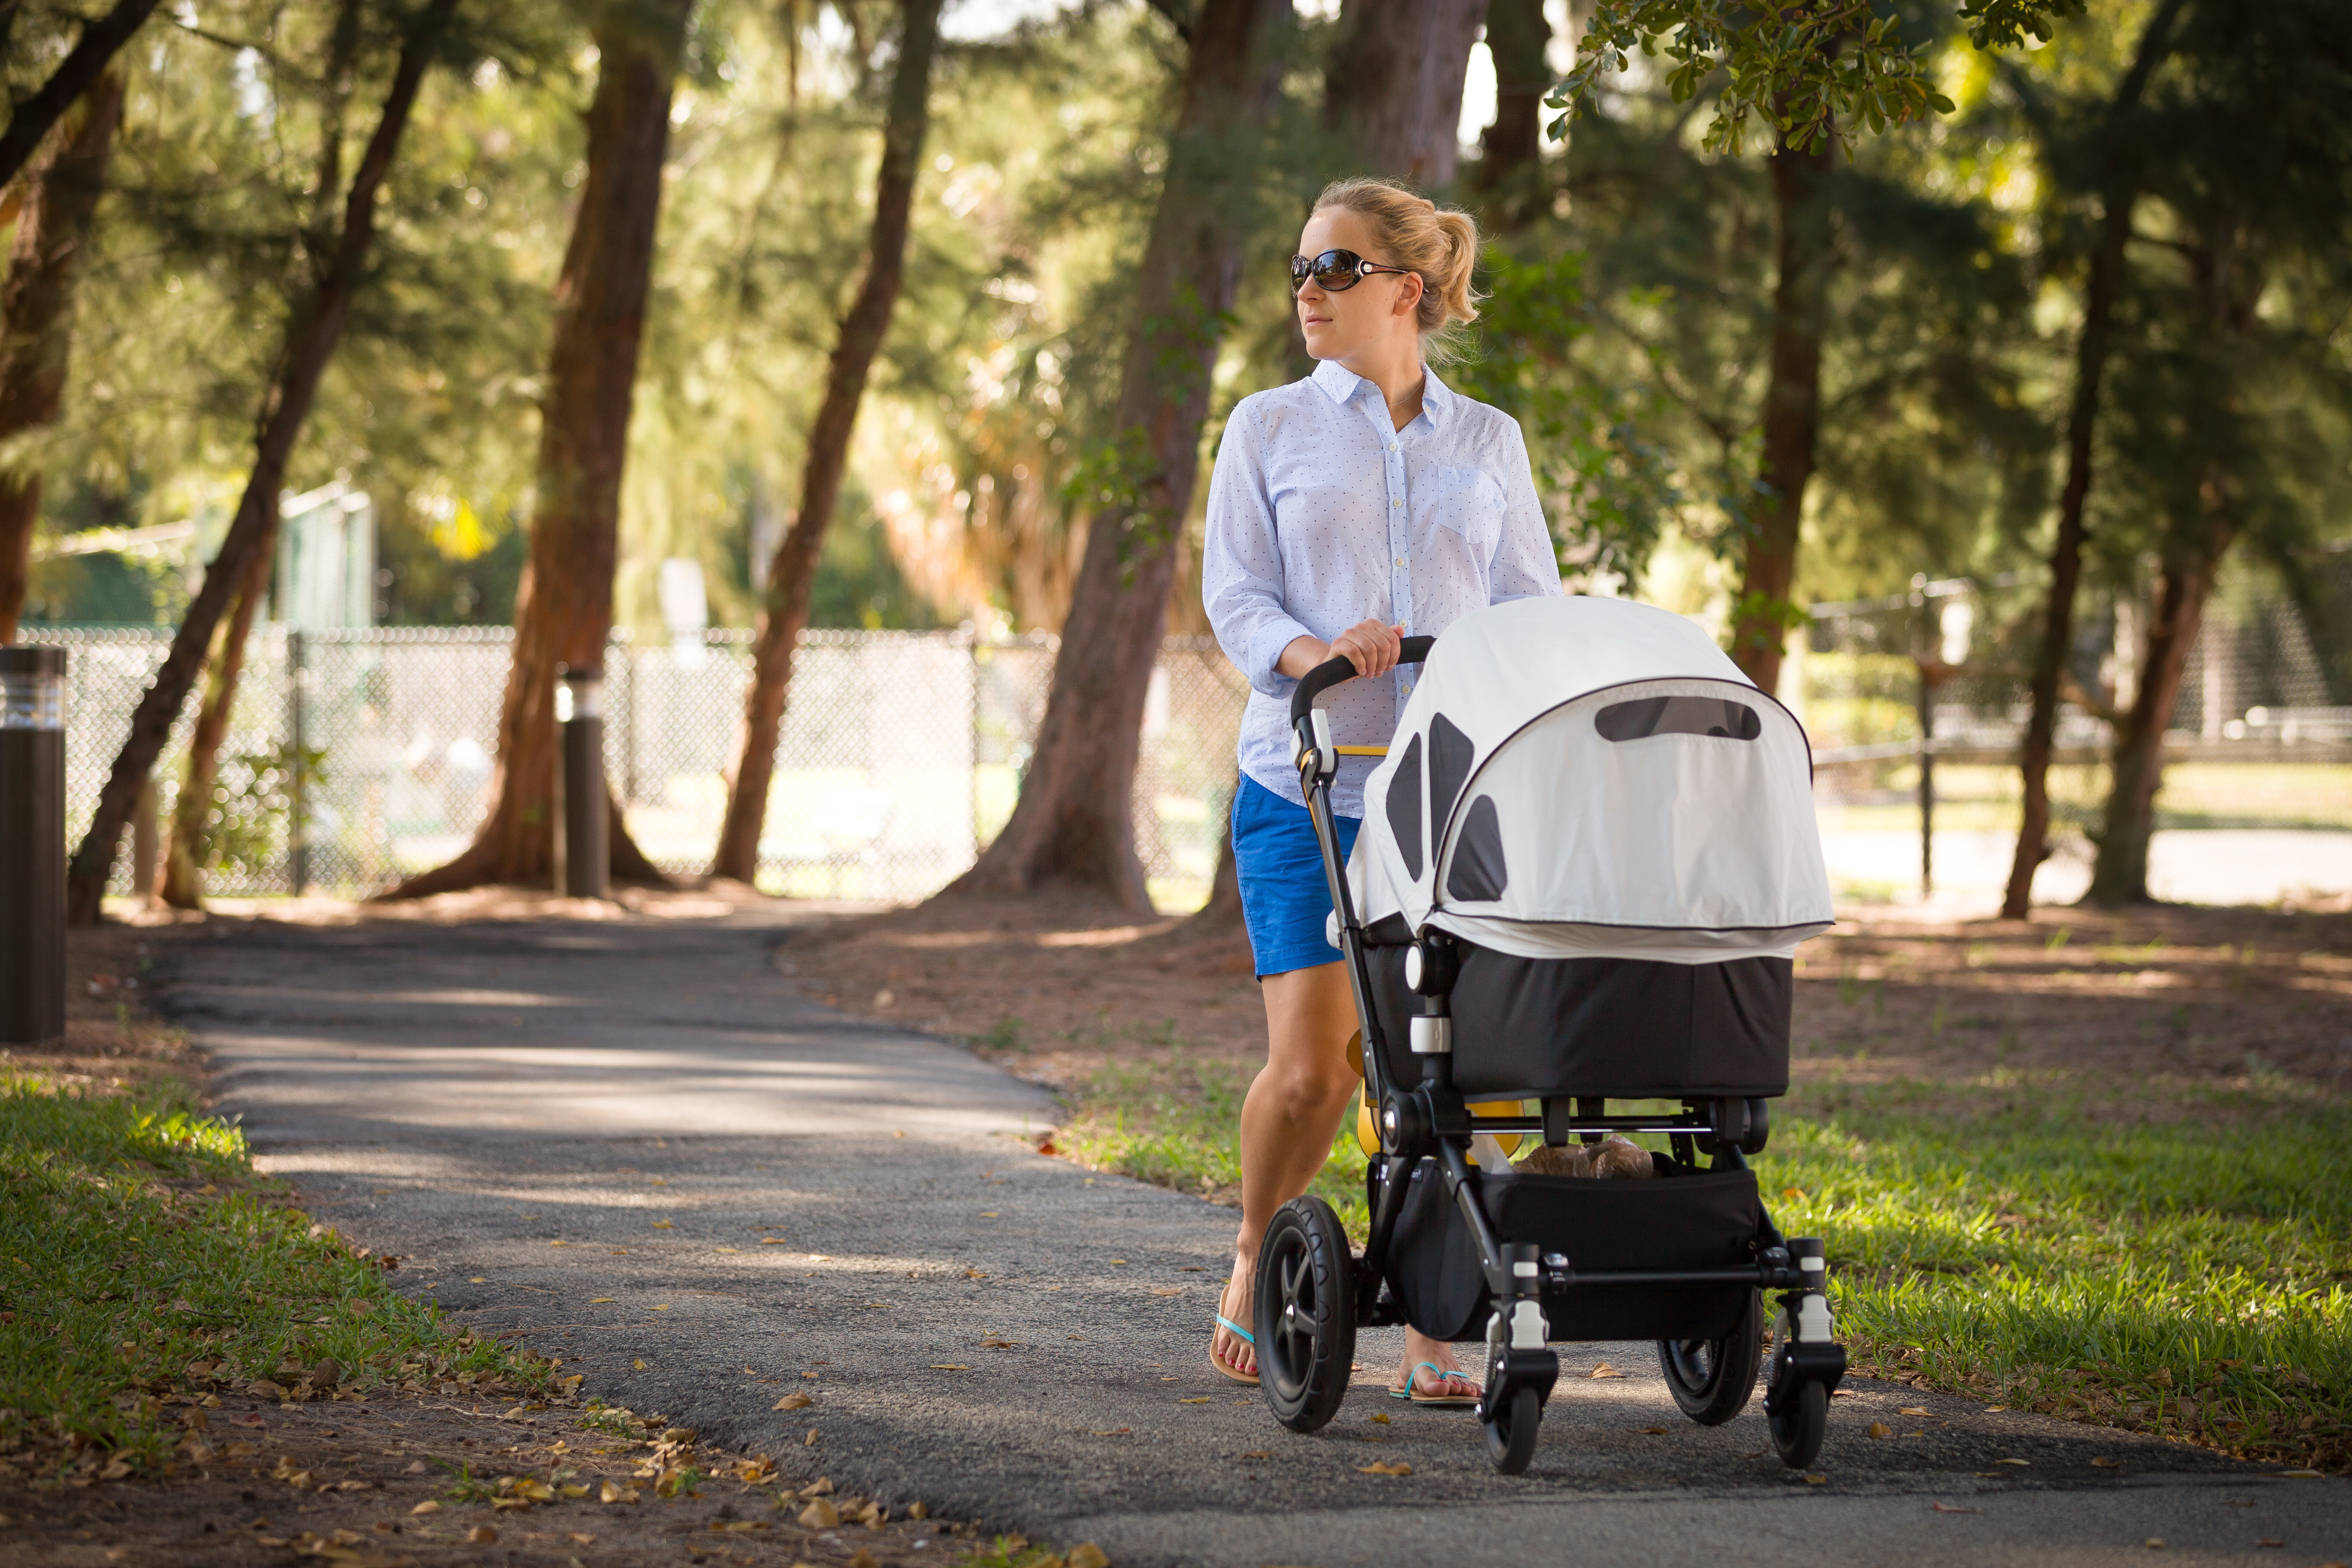 best strollers for hot weather